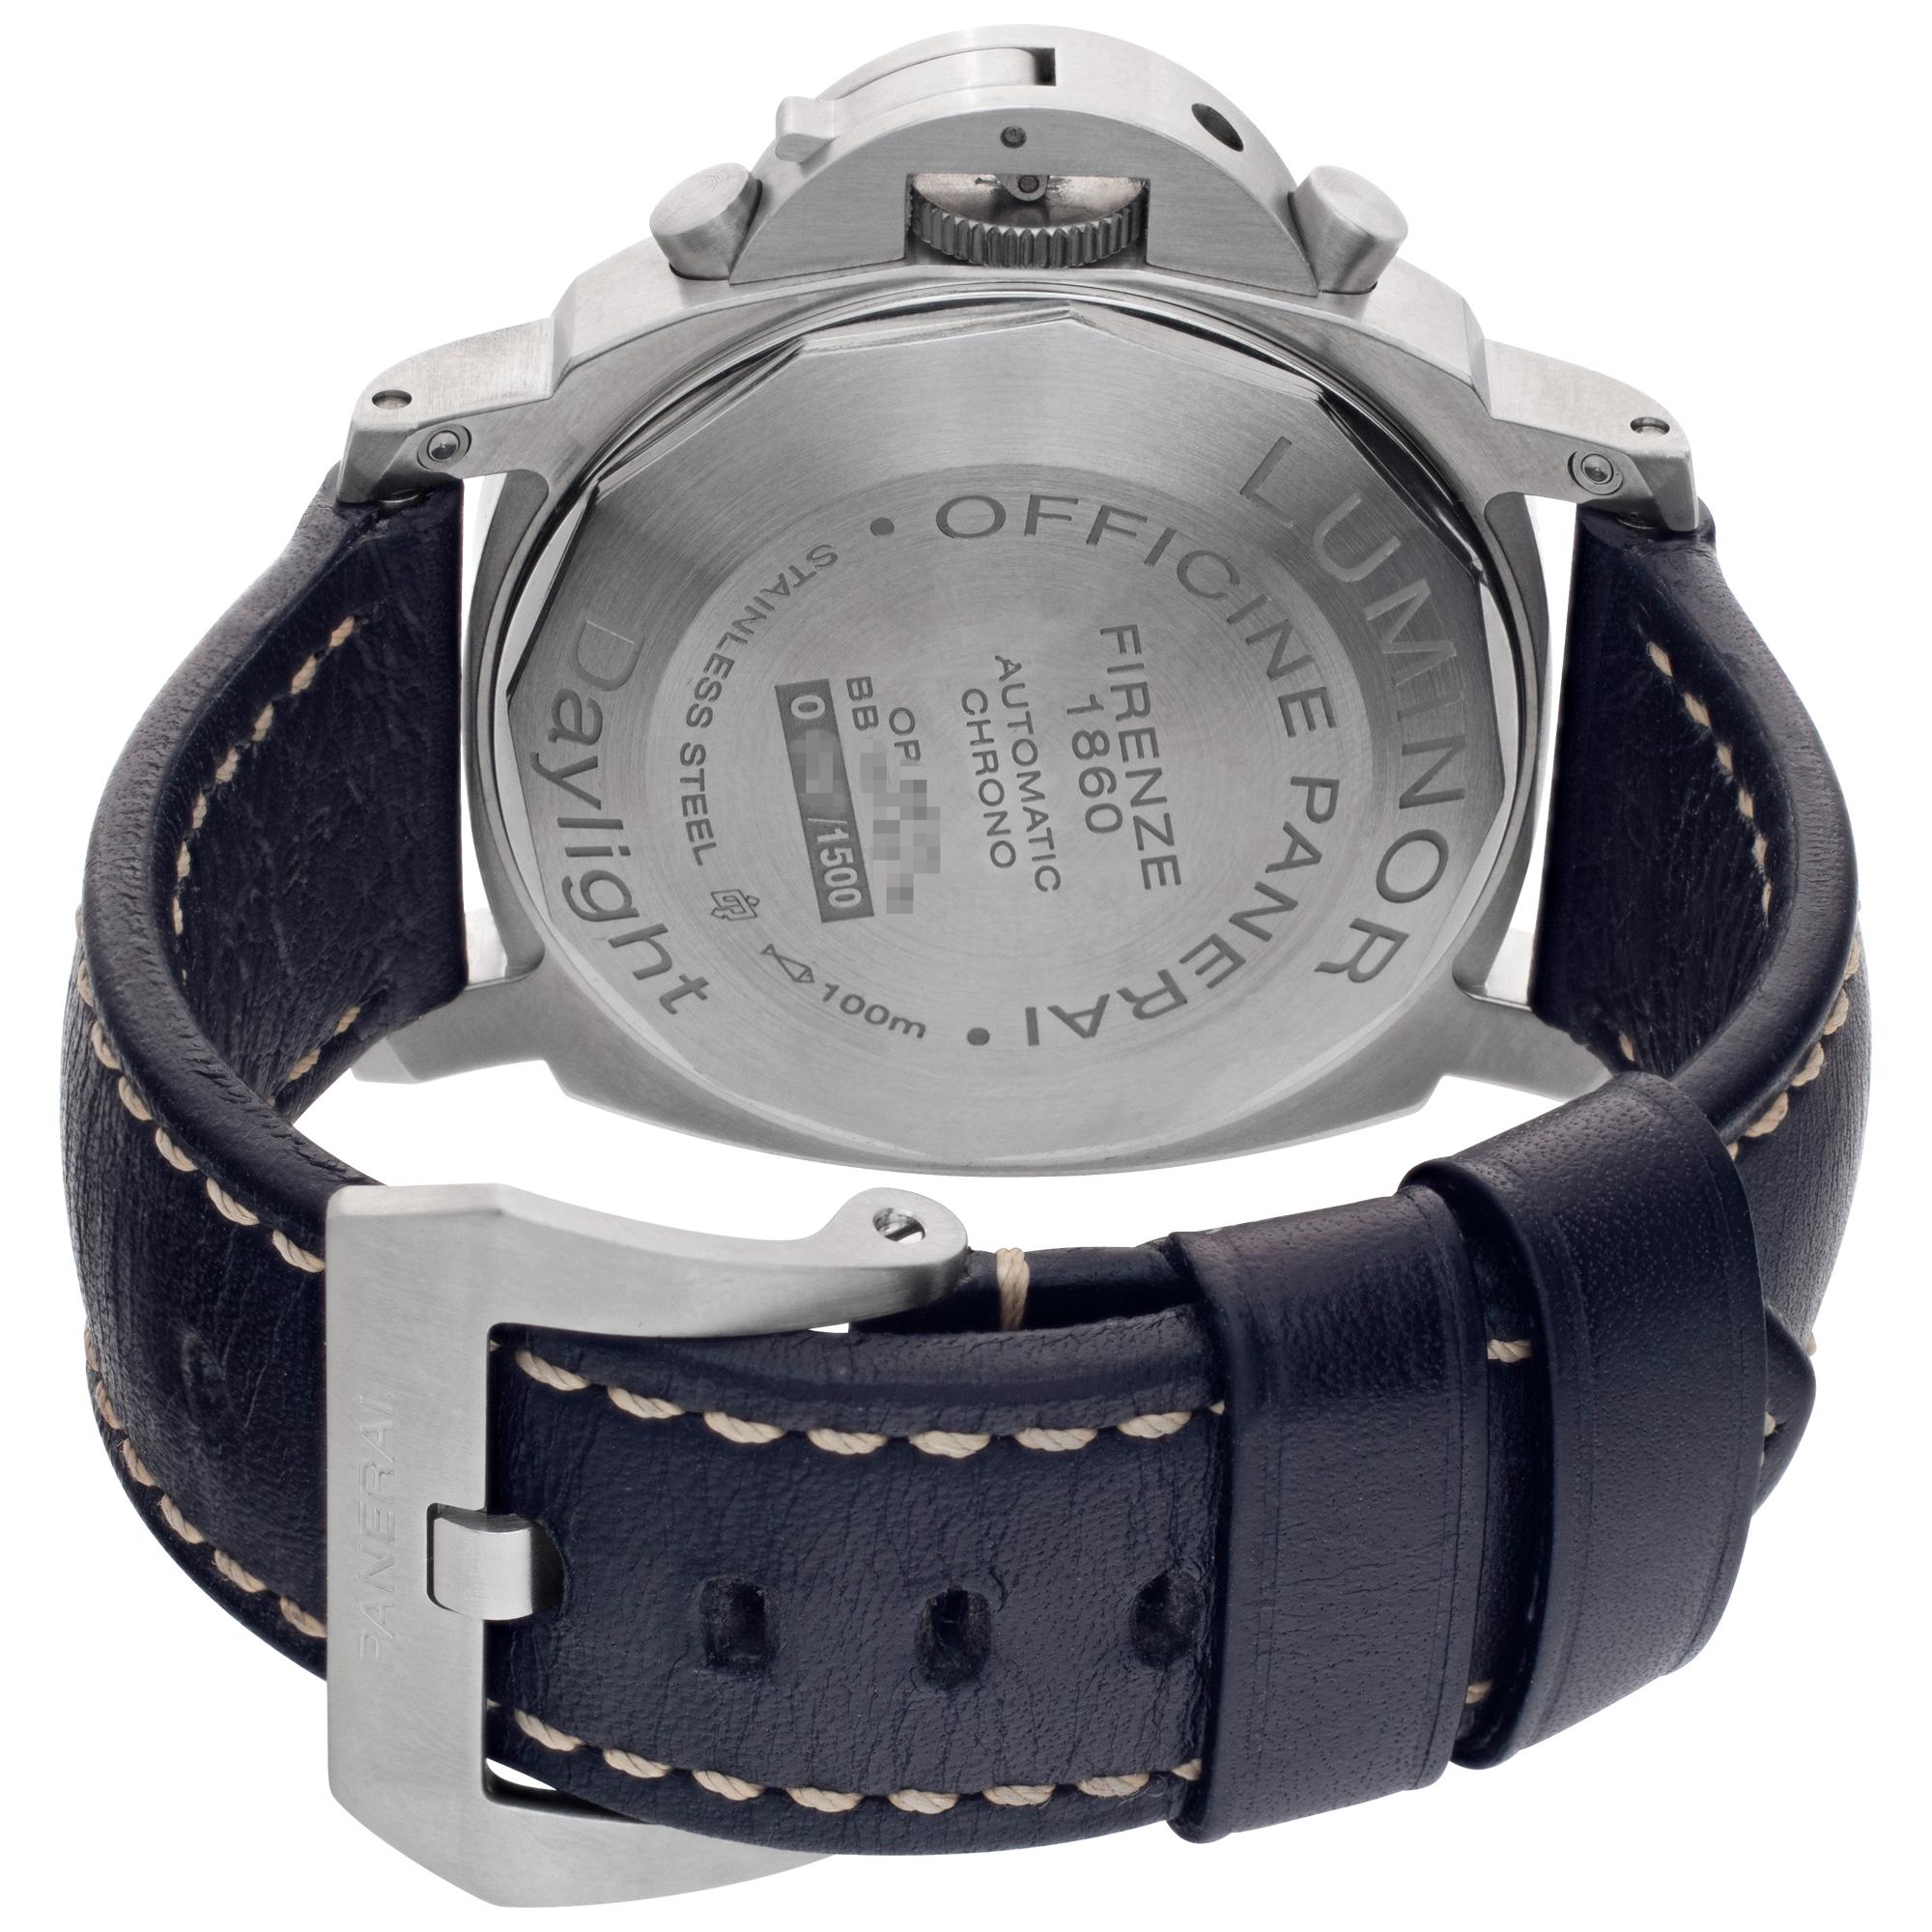 moramax watch price